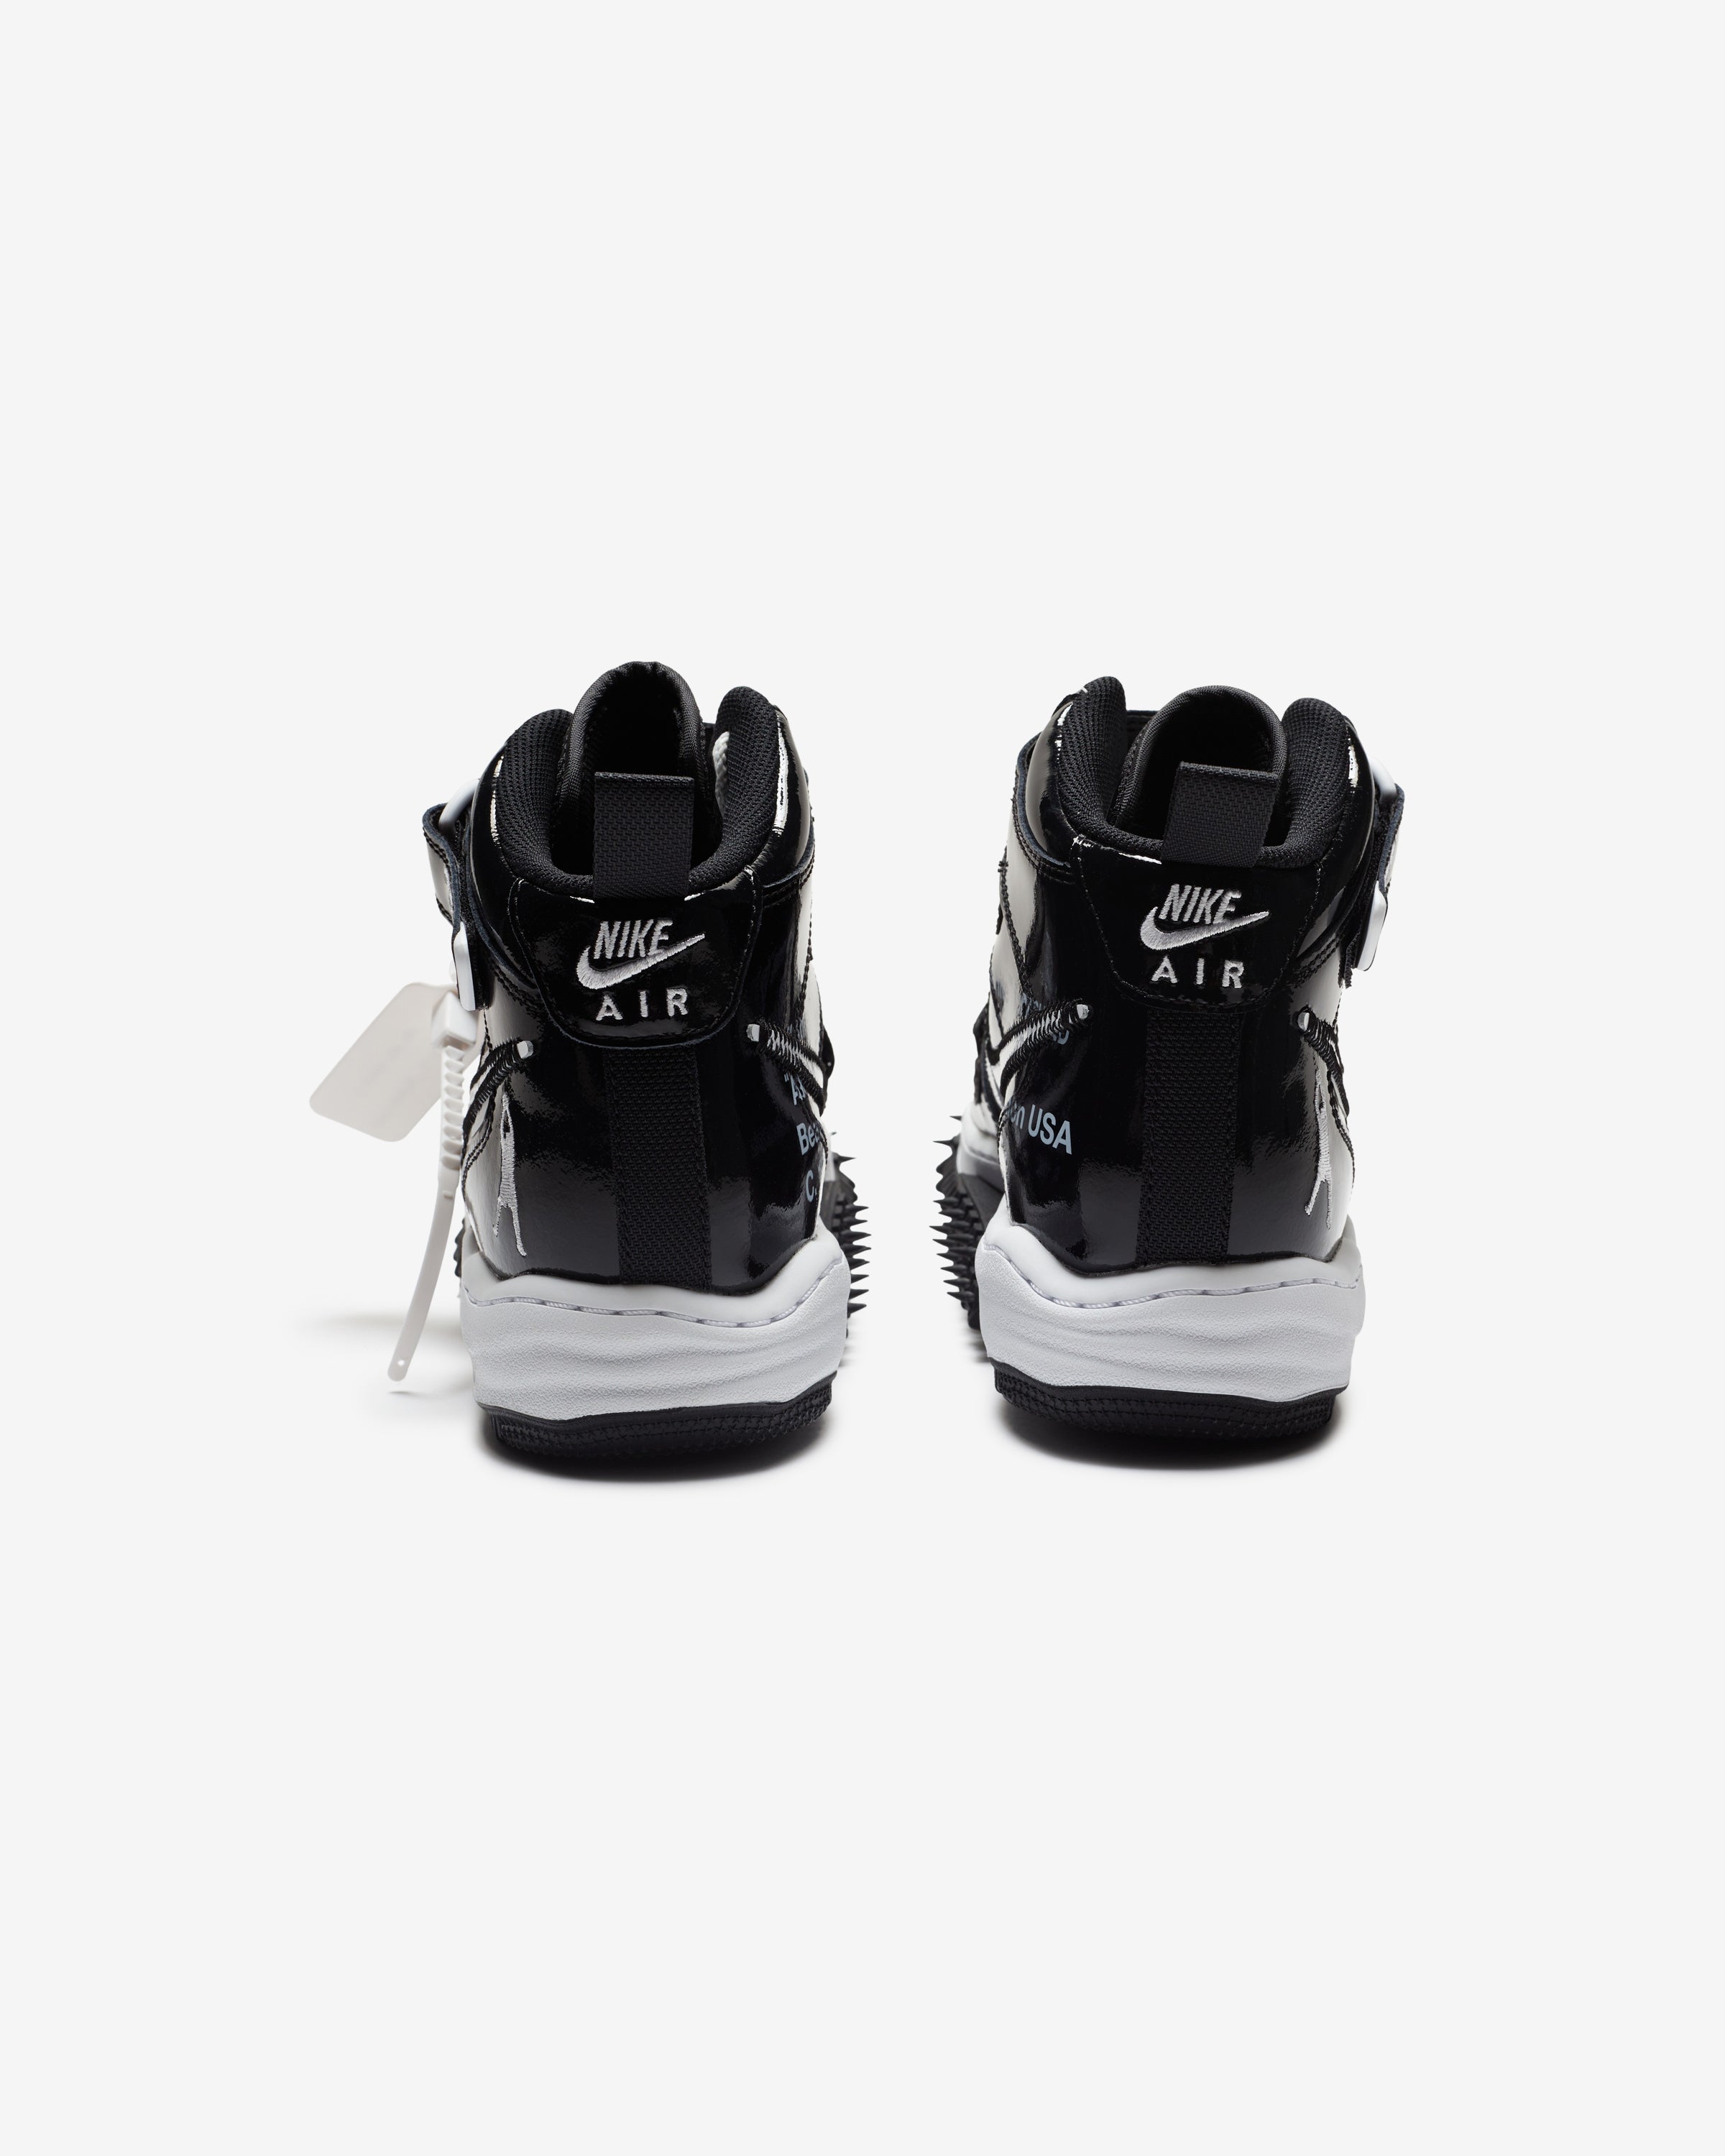 Off-White Nike Air Force 1 Mid Black